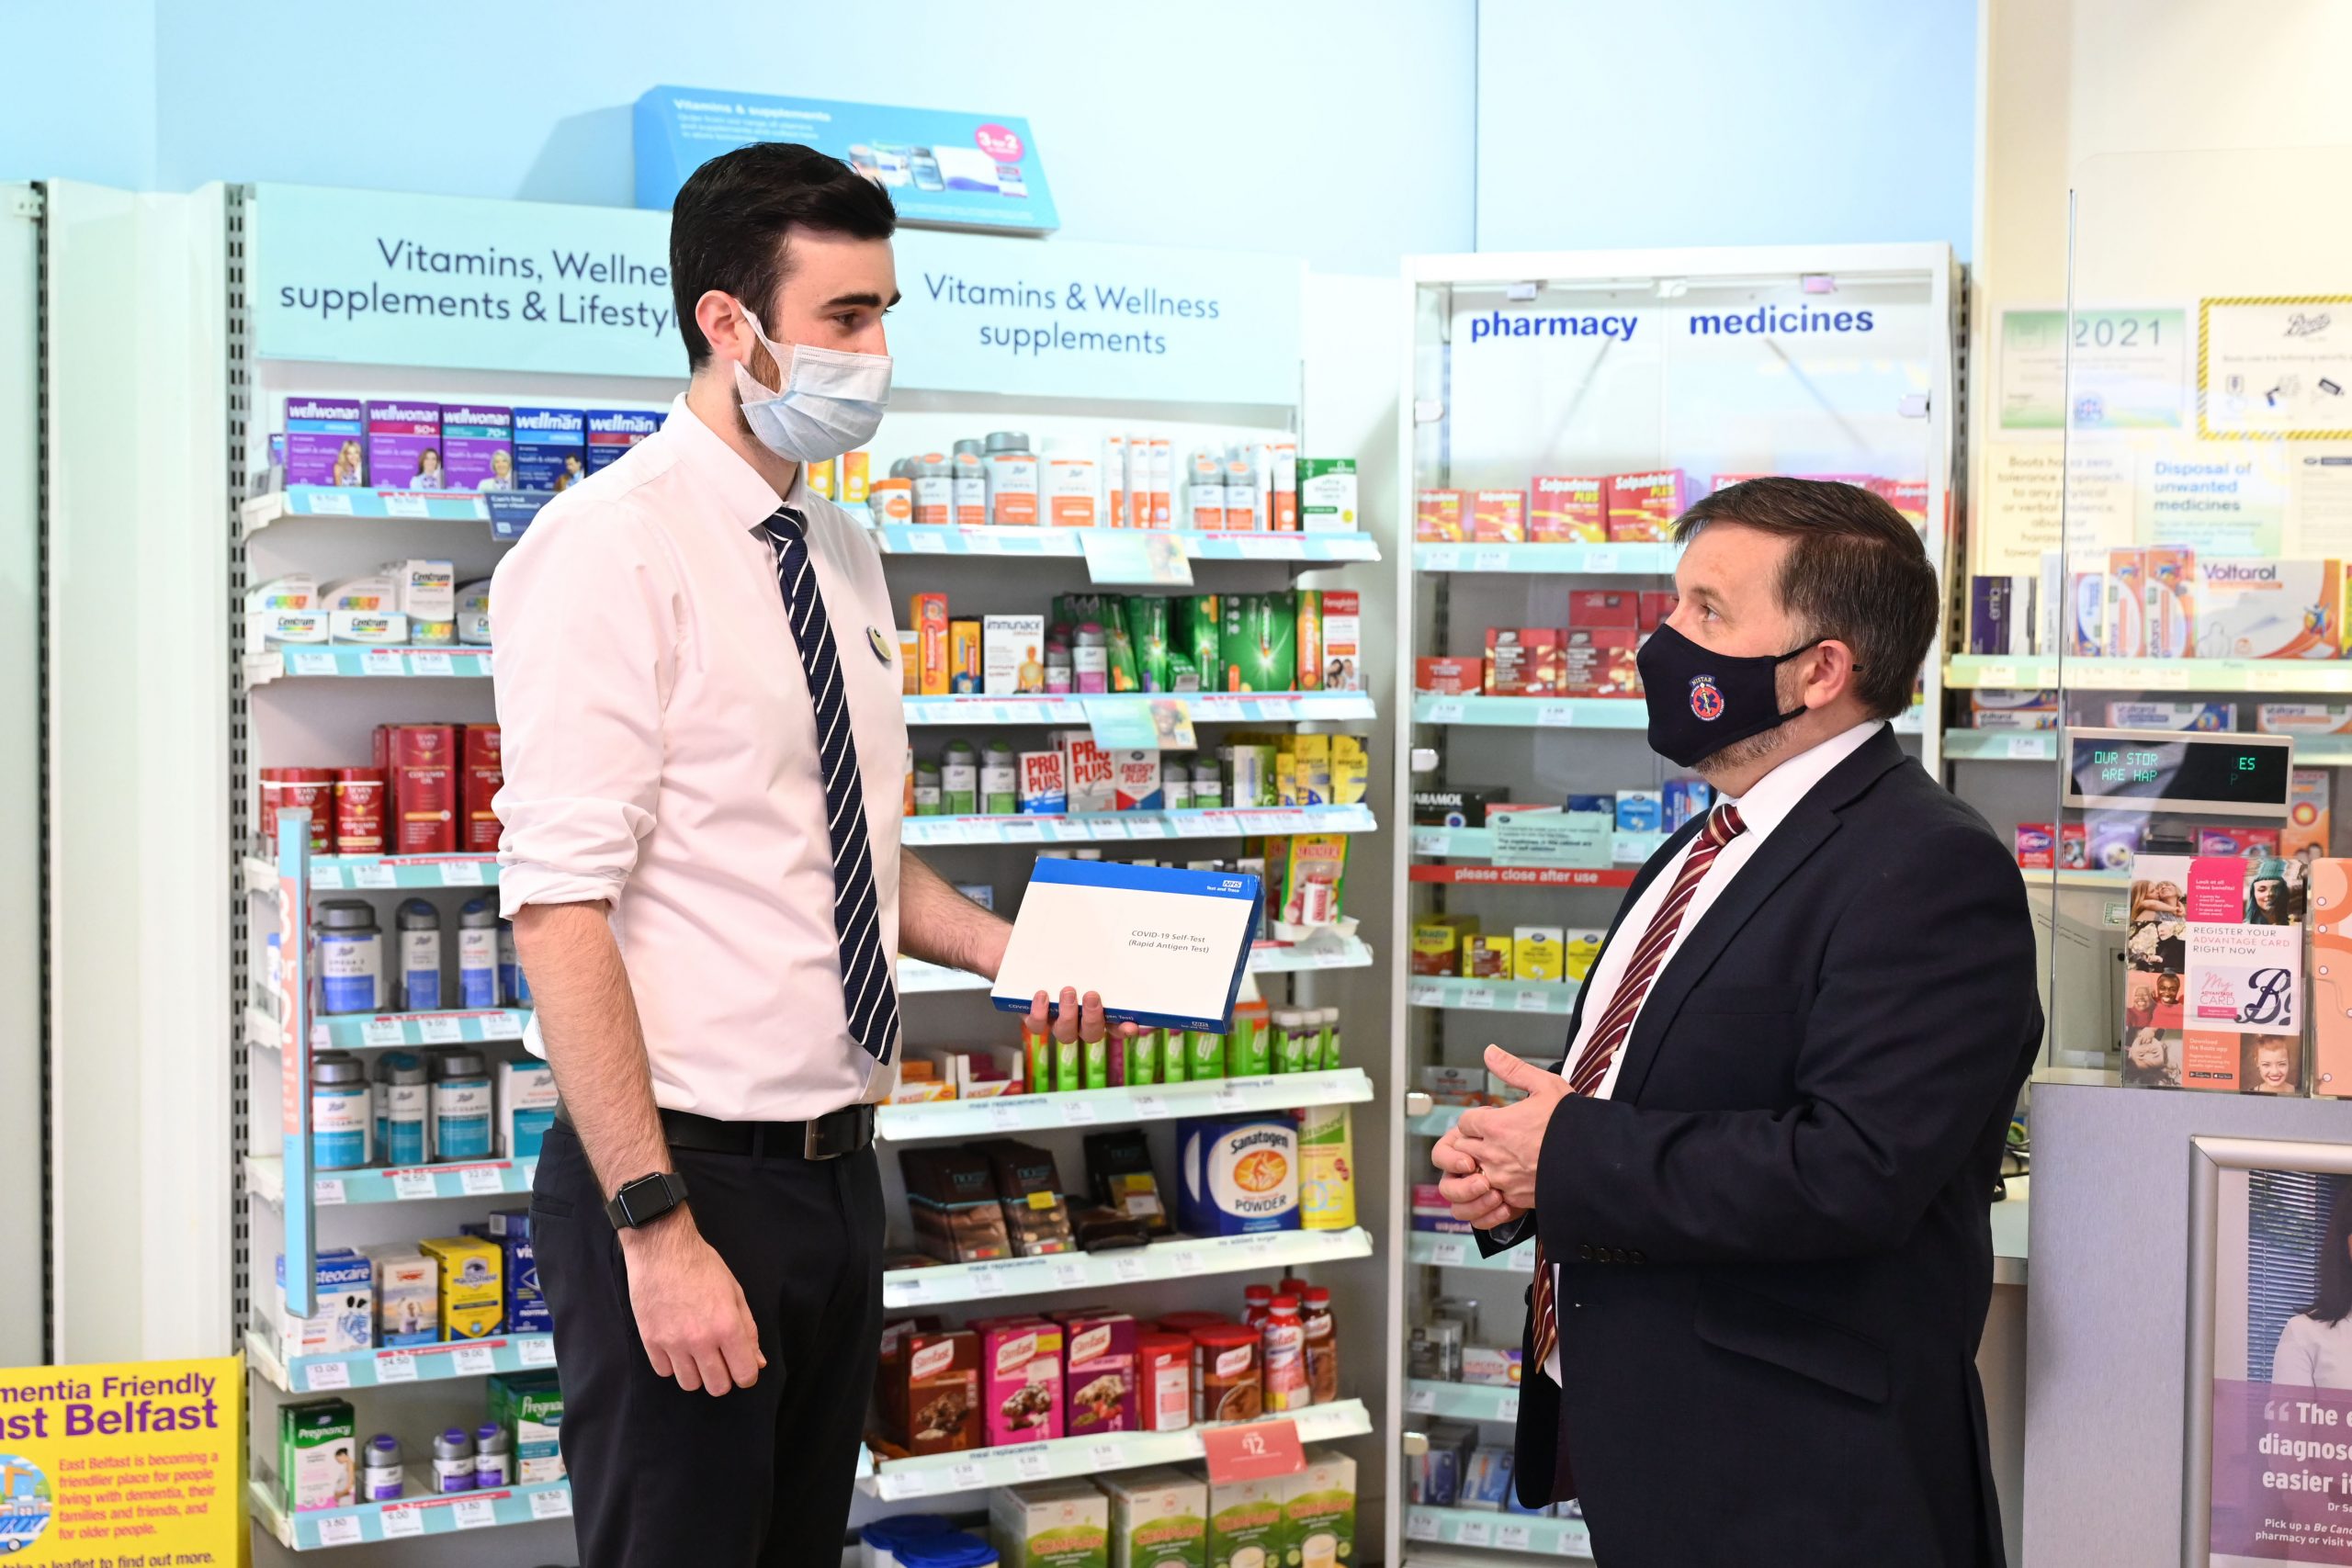 420 Community Pharmacies sign up for rapid COVID-19 Tests Collect Service